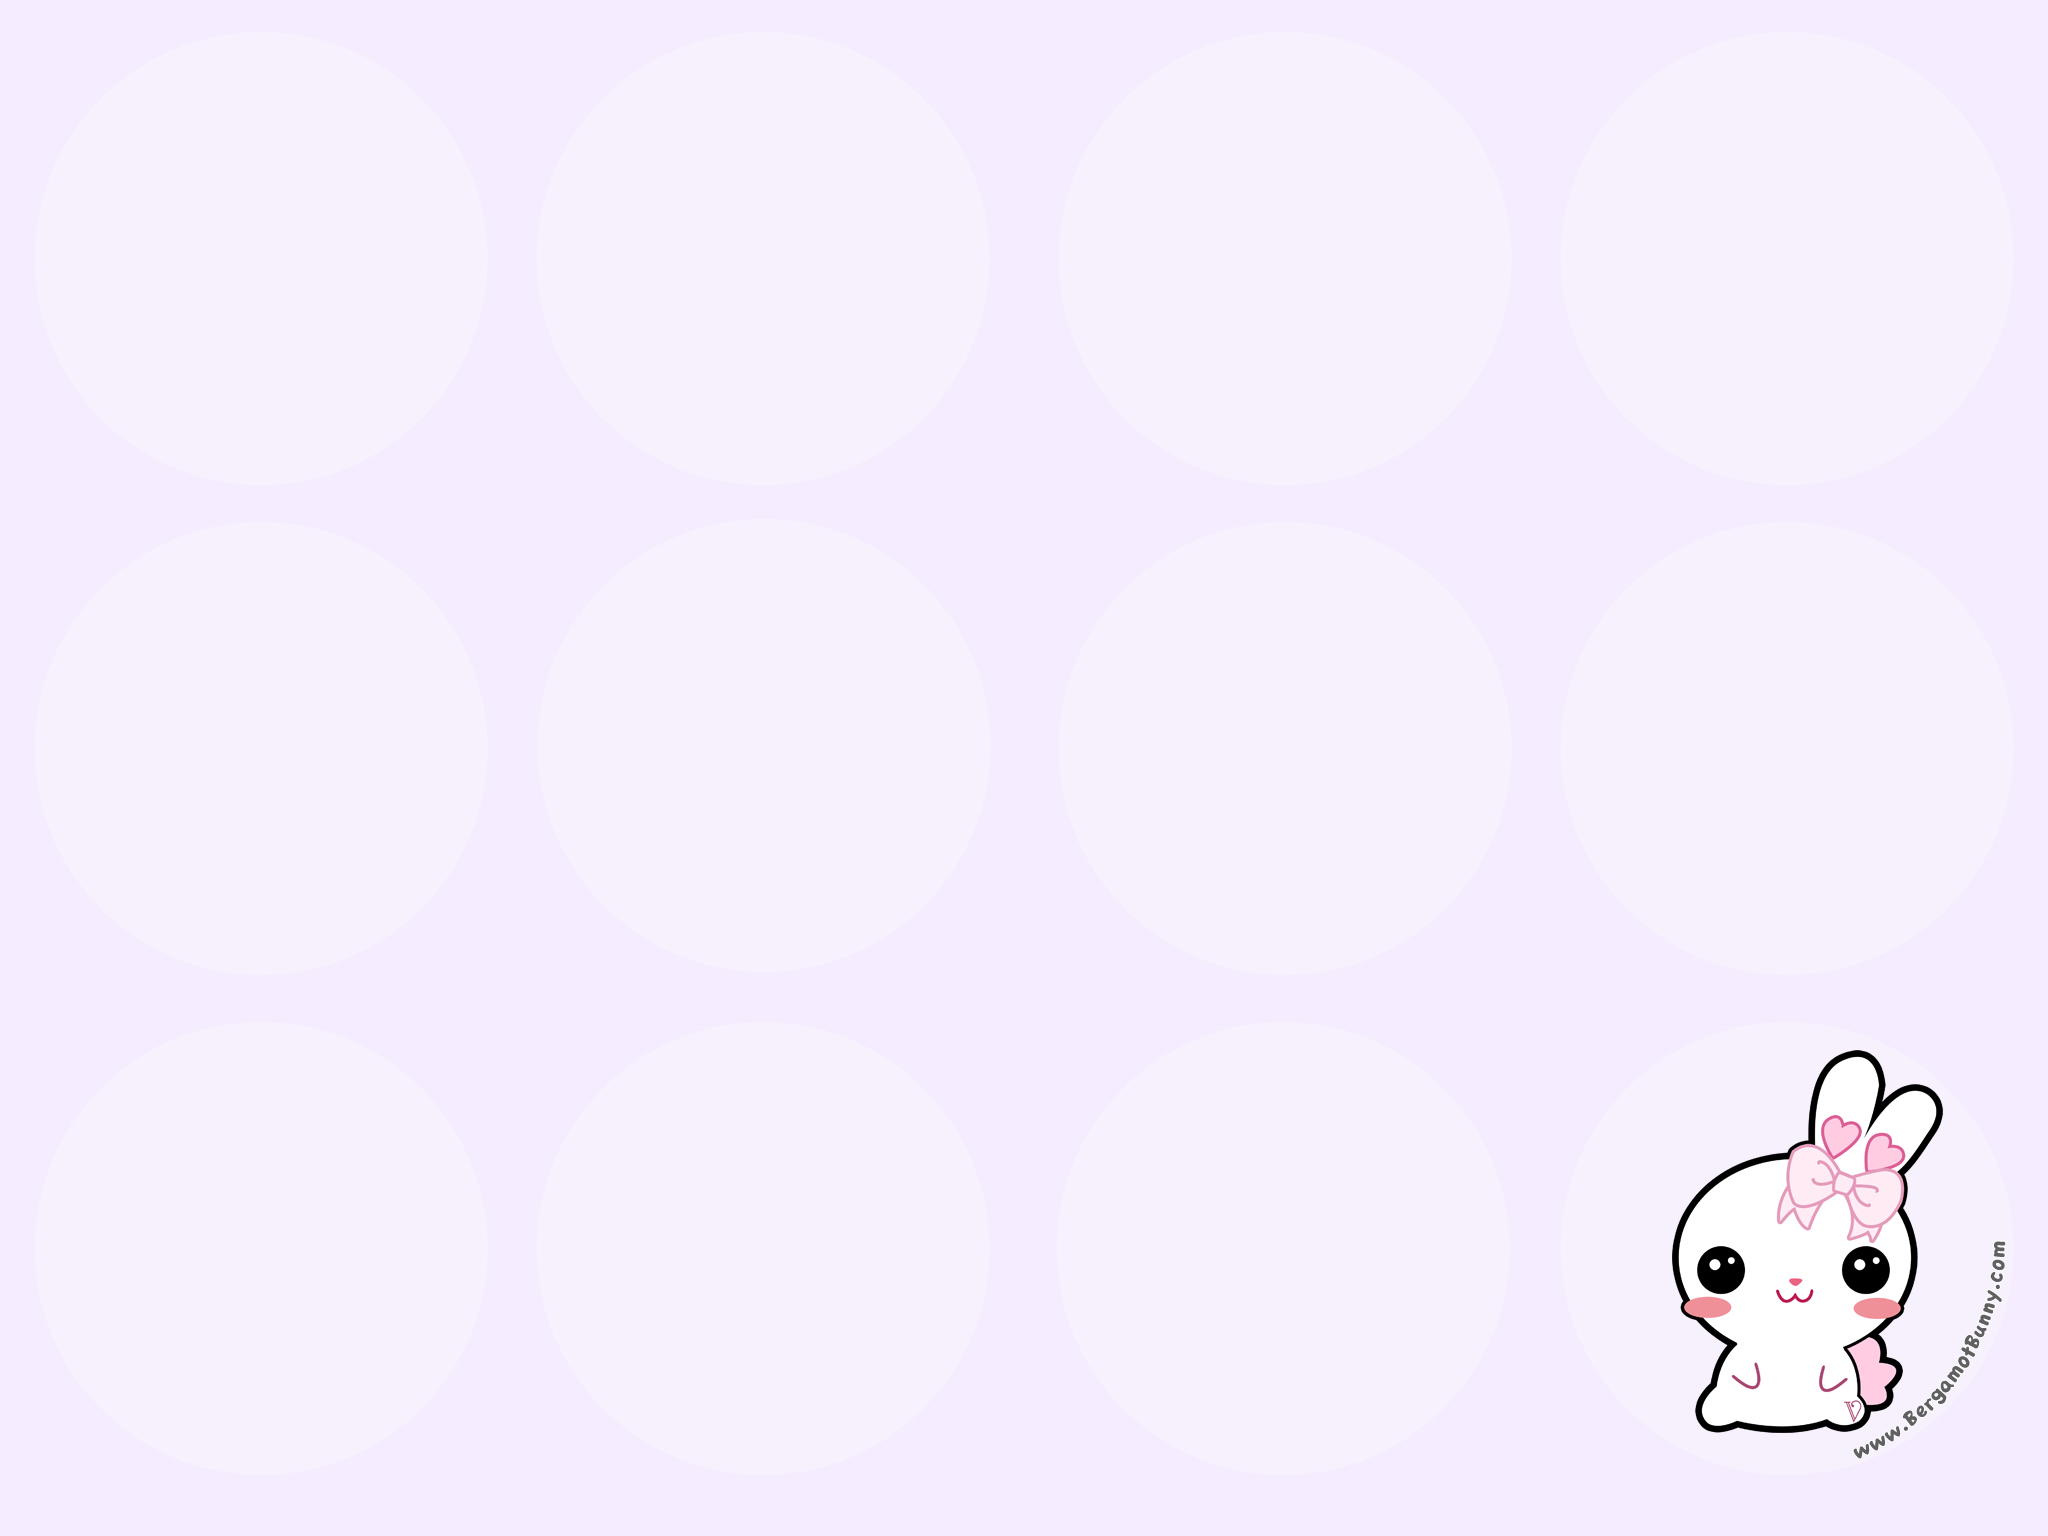 Cute And Simple Desktop Wallpaper With A Circle